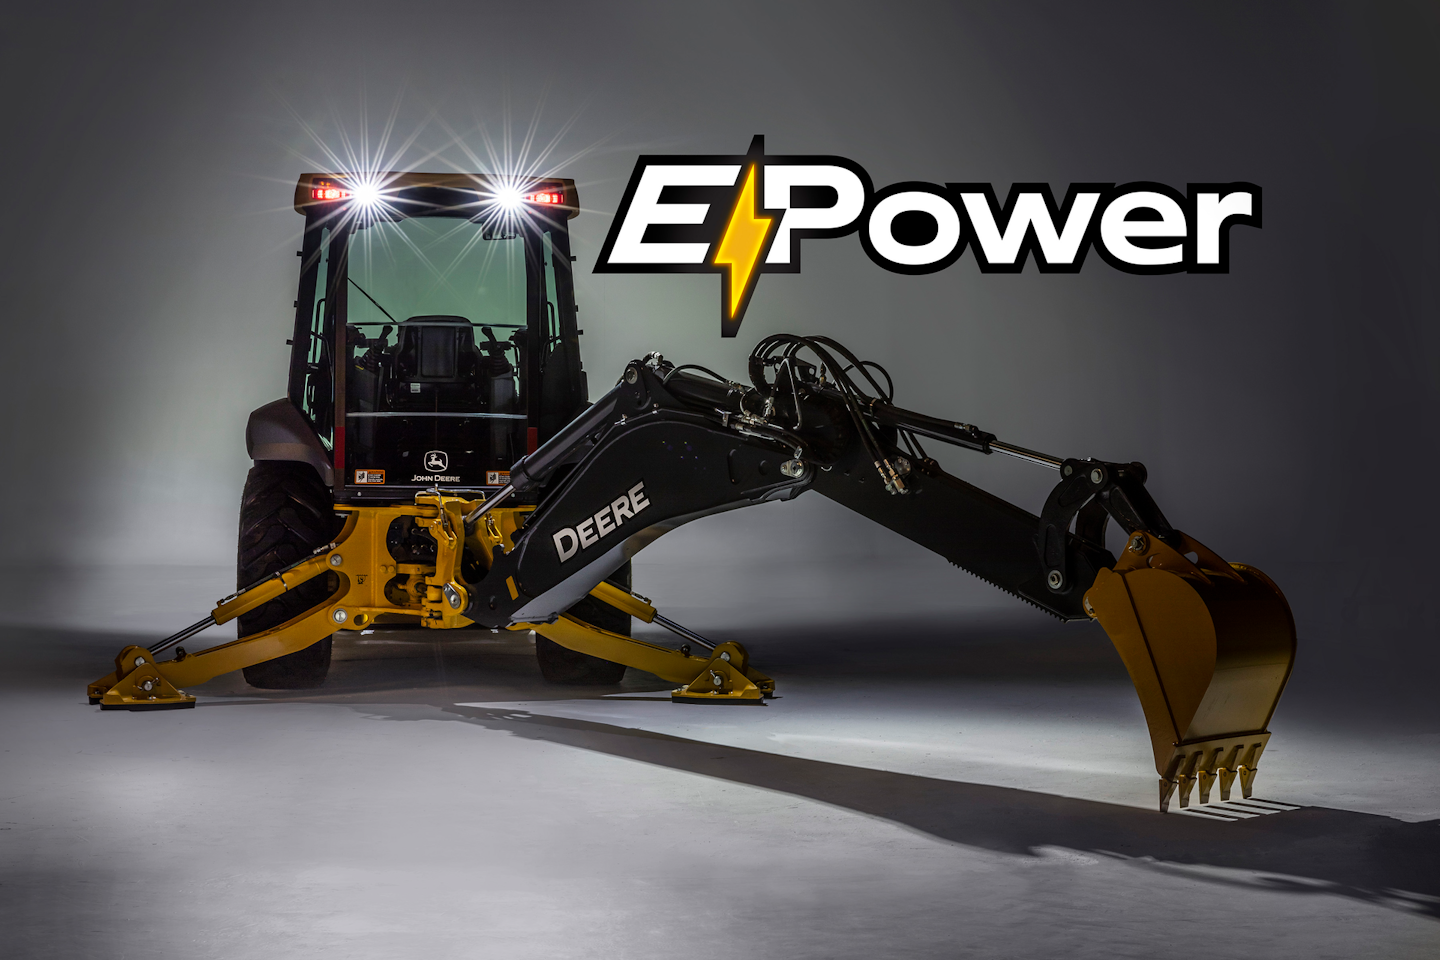 Deere's E-Power backhoe is in the early stages of development.